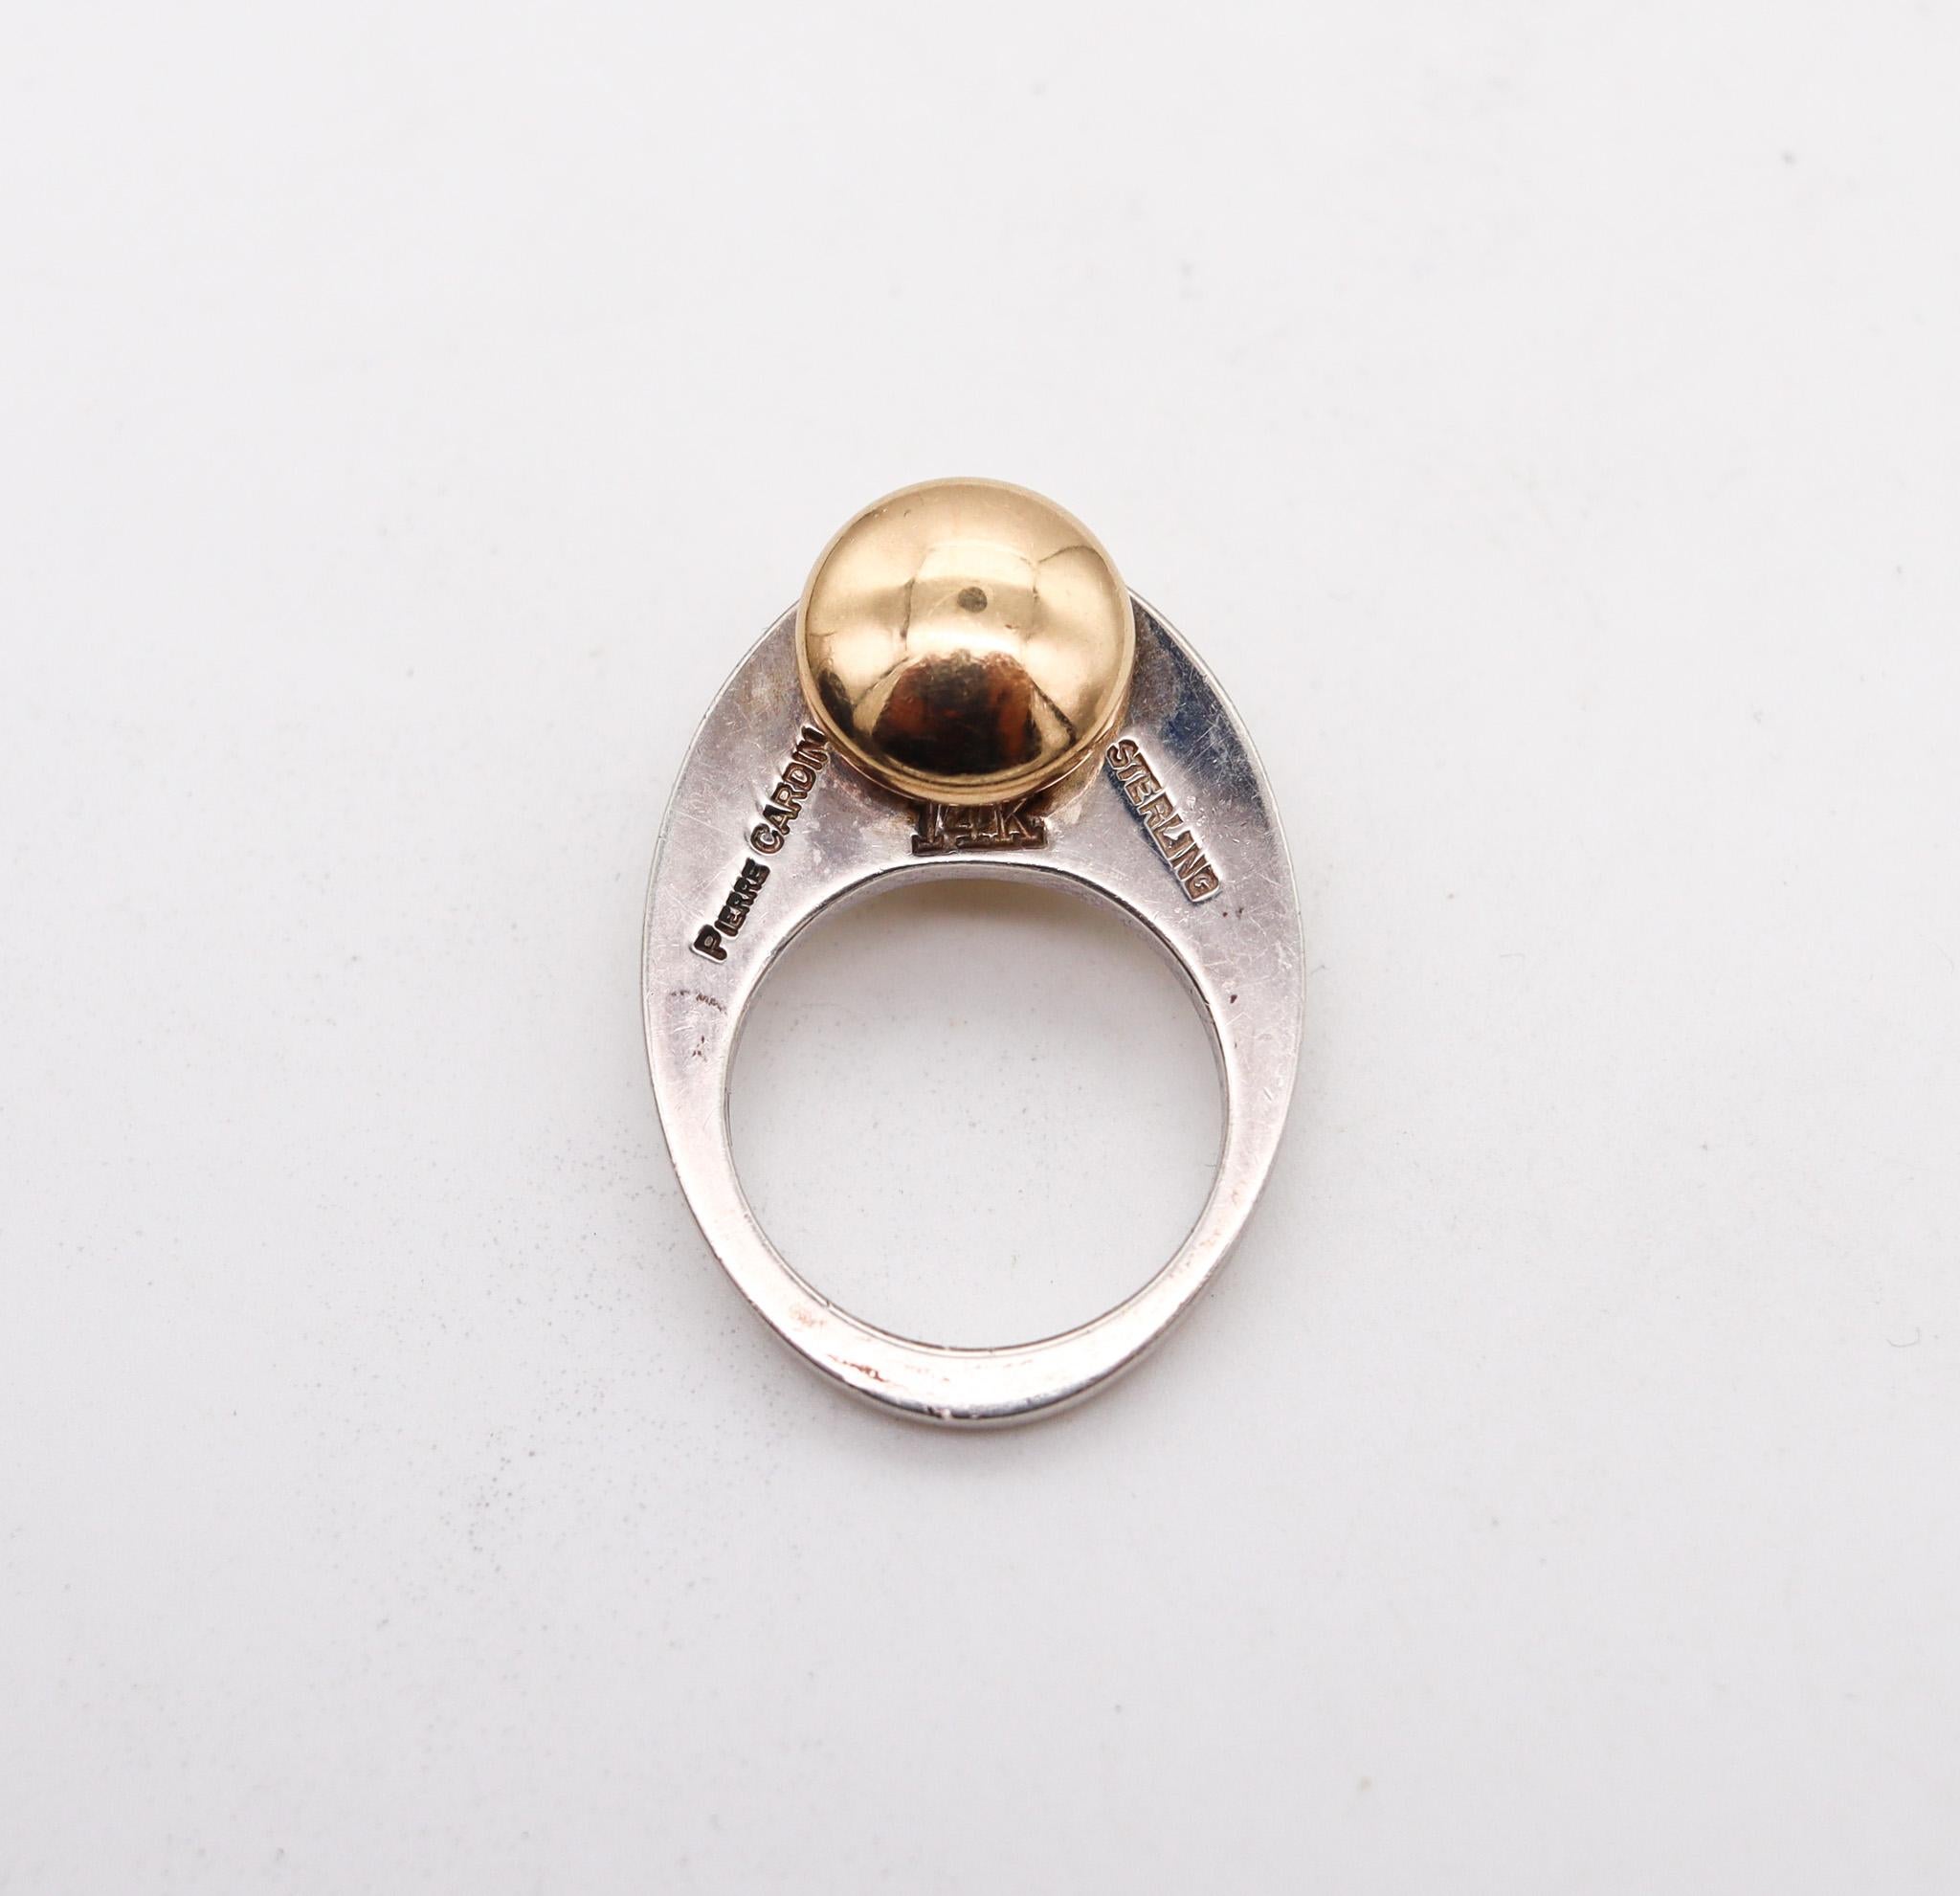 Modernist Pierre Cardin 1970 Paris Geometric Sculptural Ring in 14kt Gold and Sterling For Sale